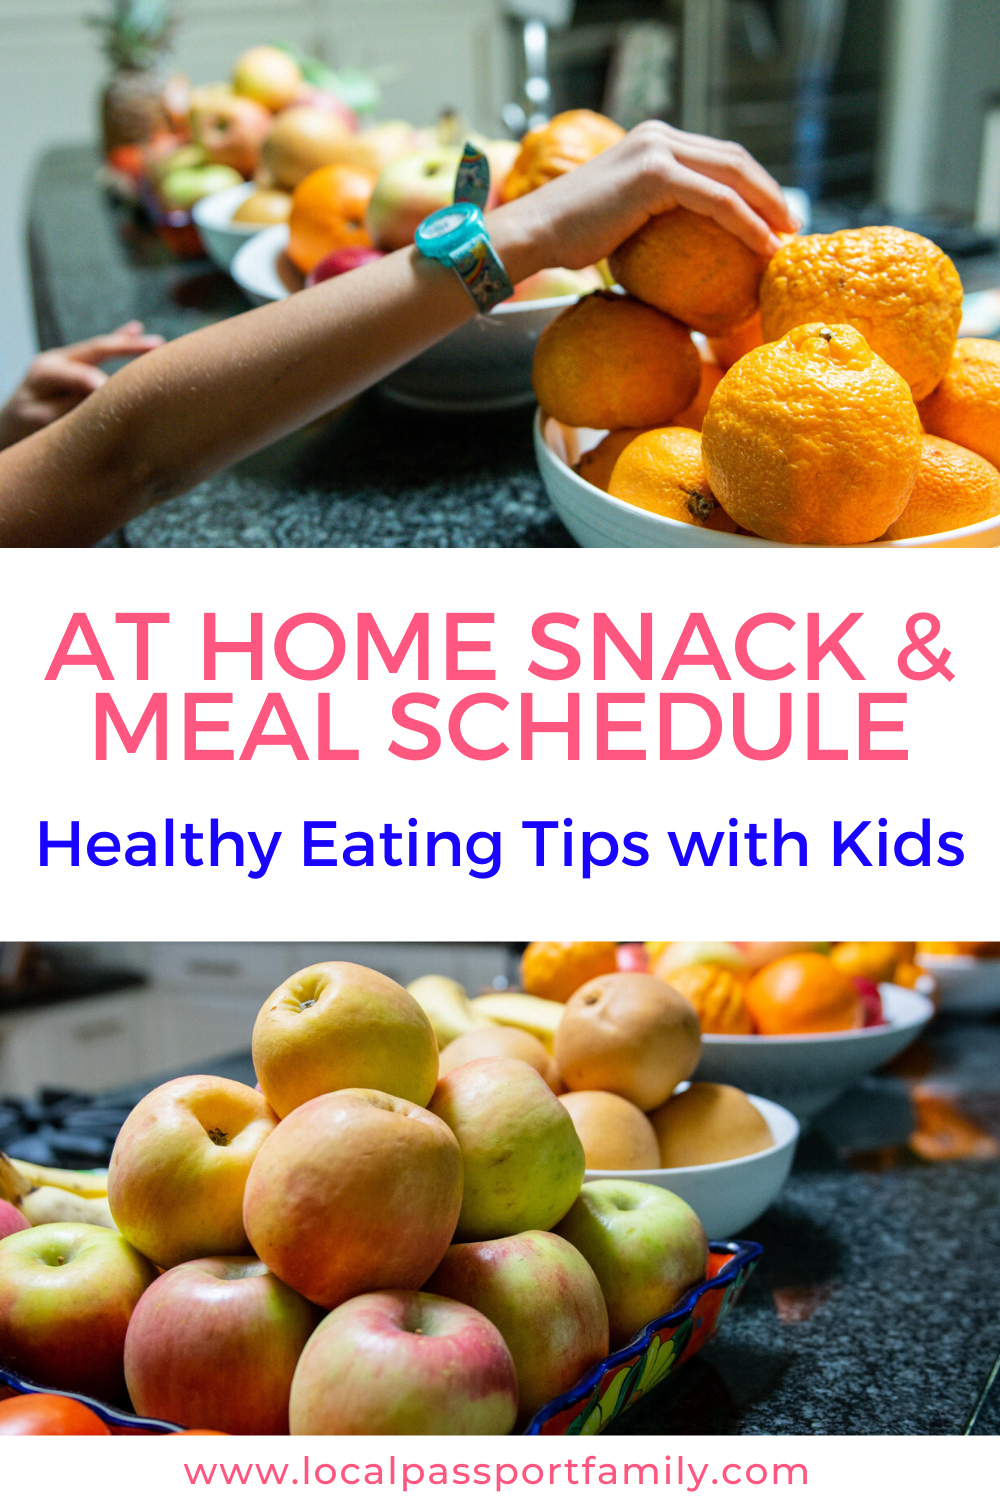 Our At Home Snack & Meal Schedule + Healthy Eating Tips for Kids ...